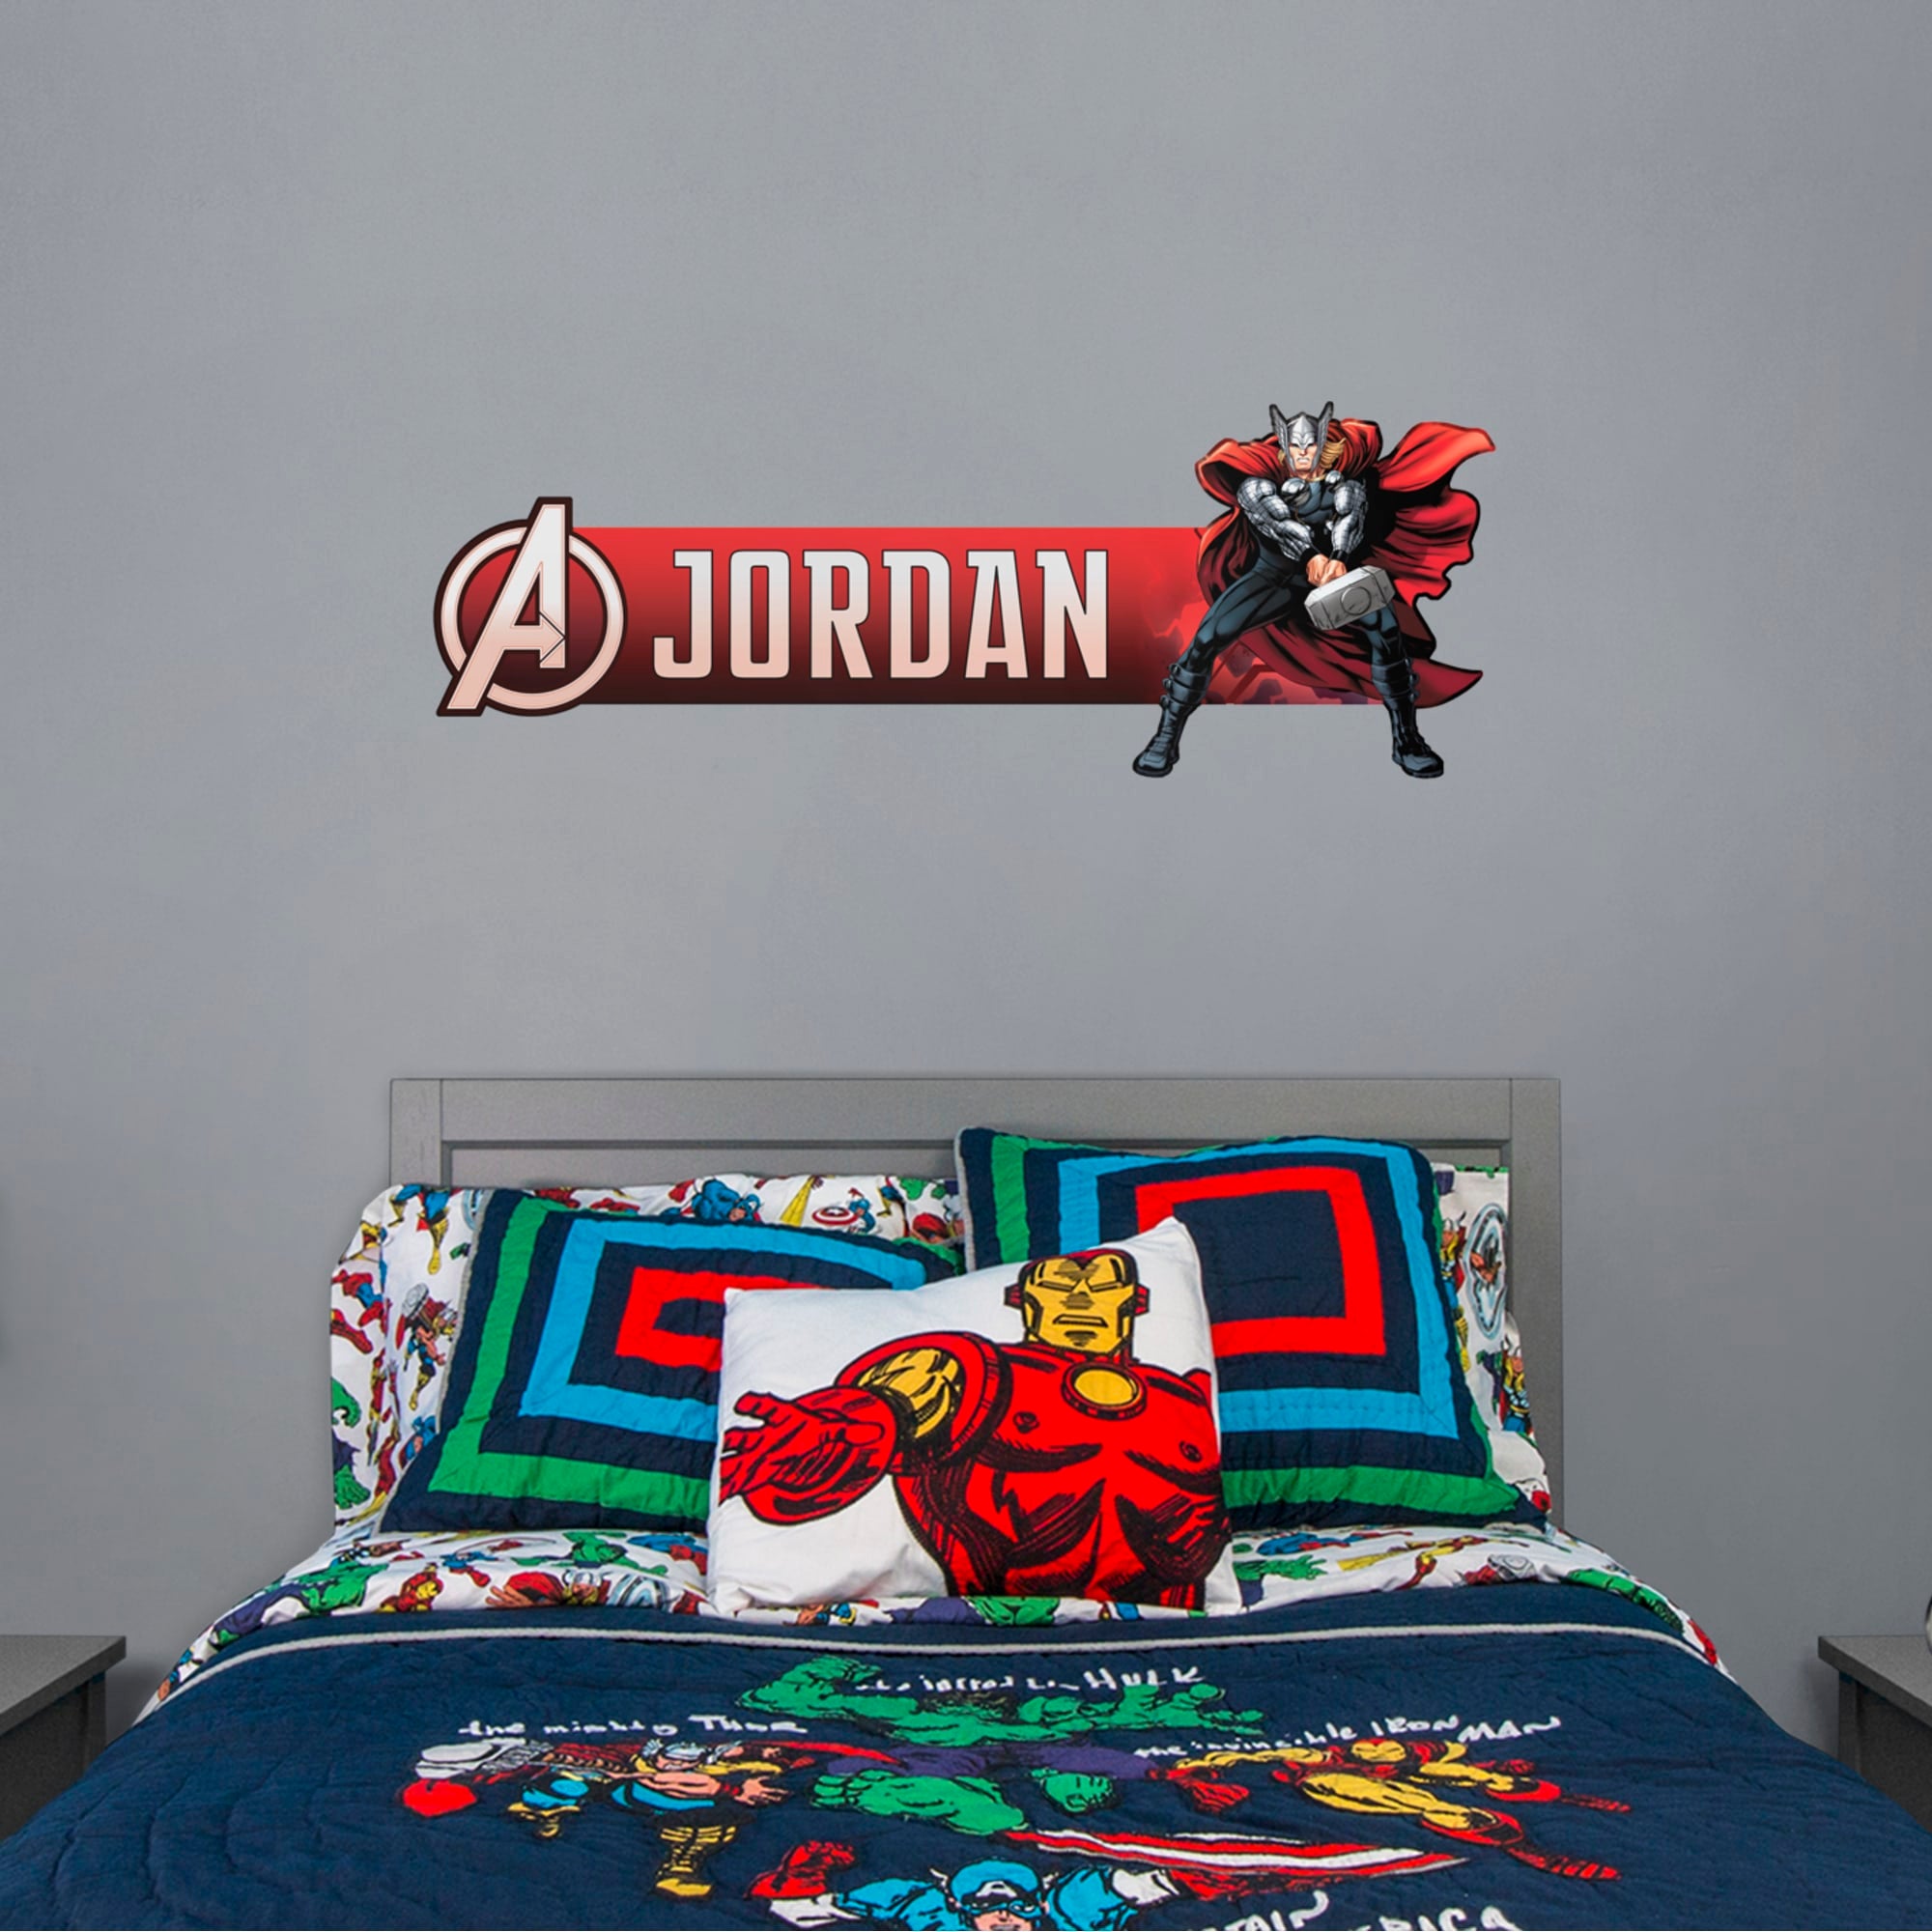 Thor: Personalized Name - Officially Licensed Removable Wall Decal 52.0"W x 39.5"H by Fathead | Vinyl